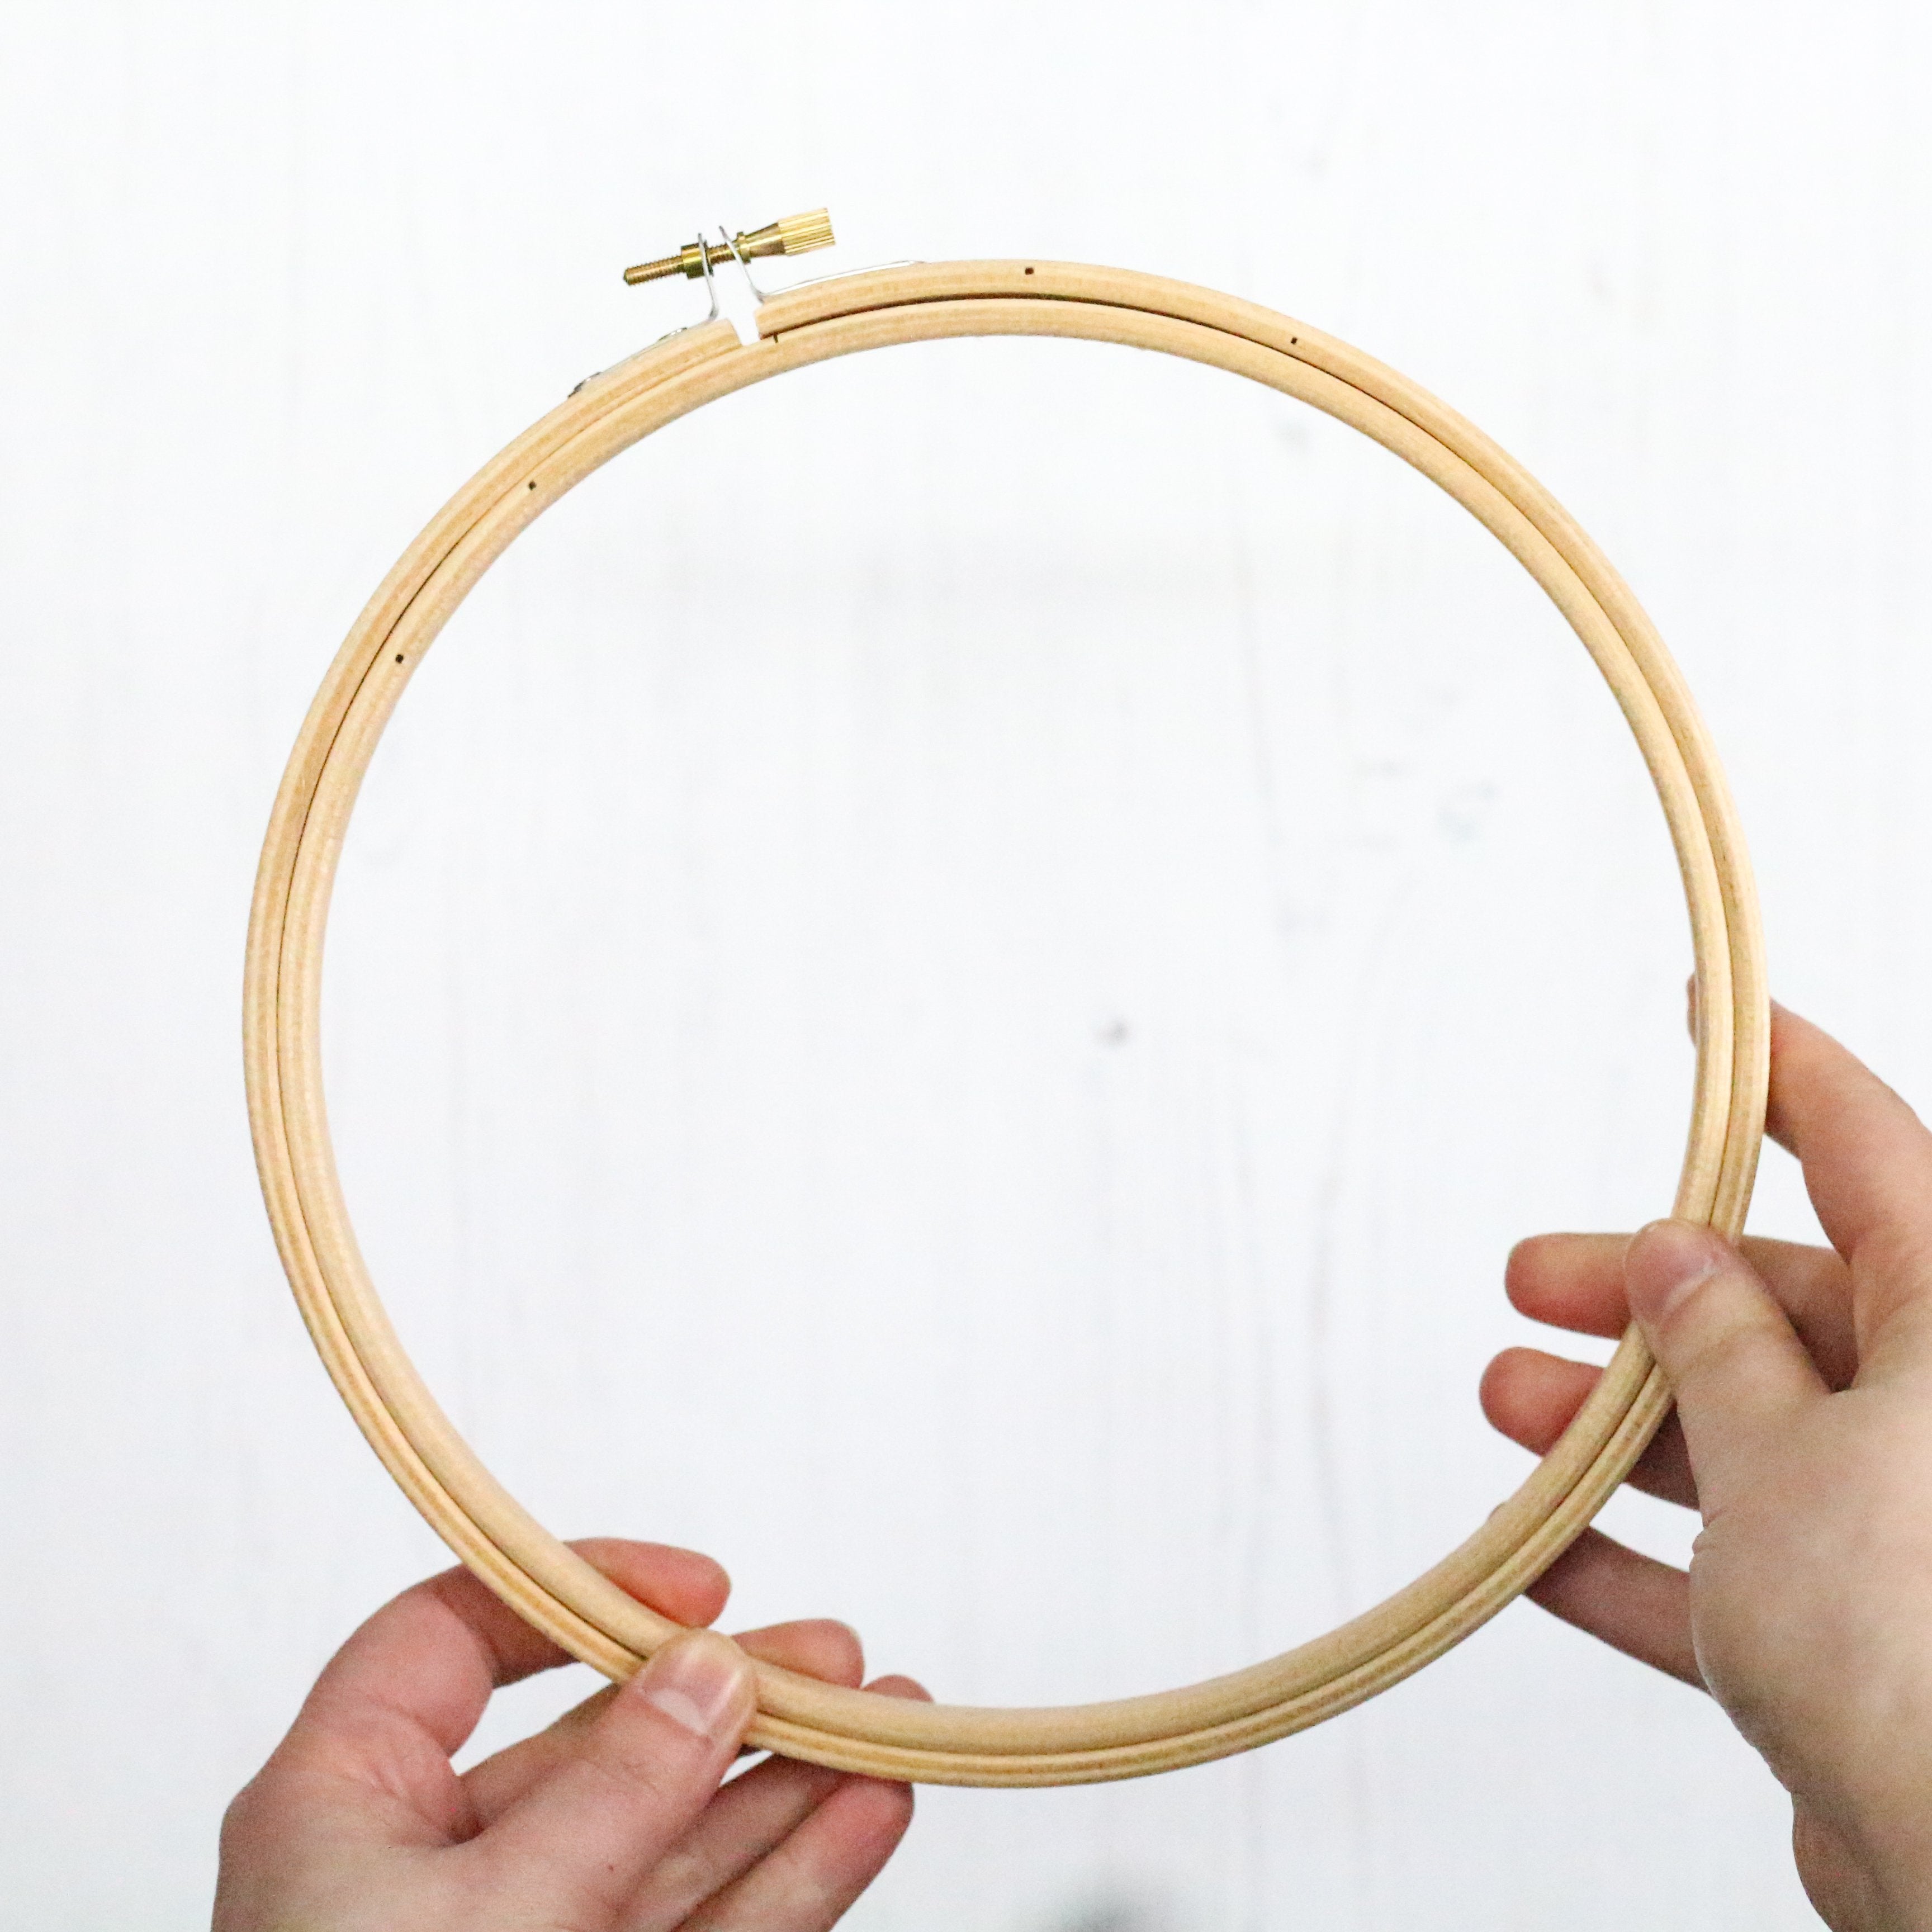 8 INCH EMBROIDERY HOOP